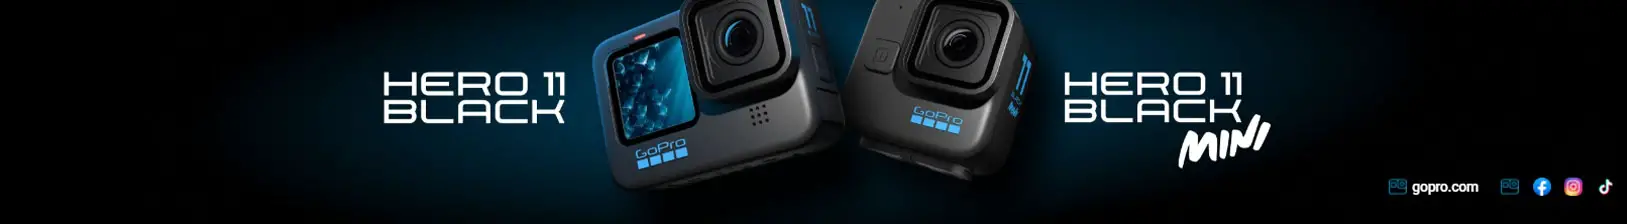 Gopro Youtube channel banner